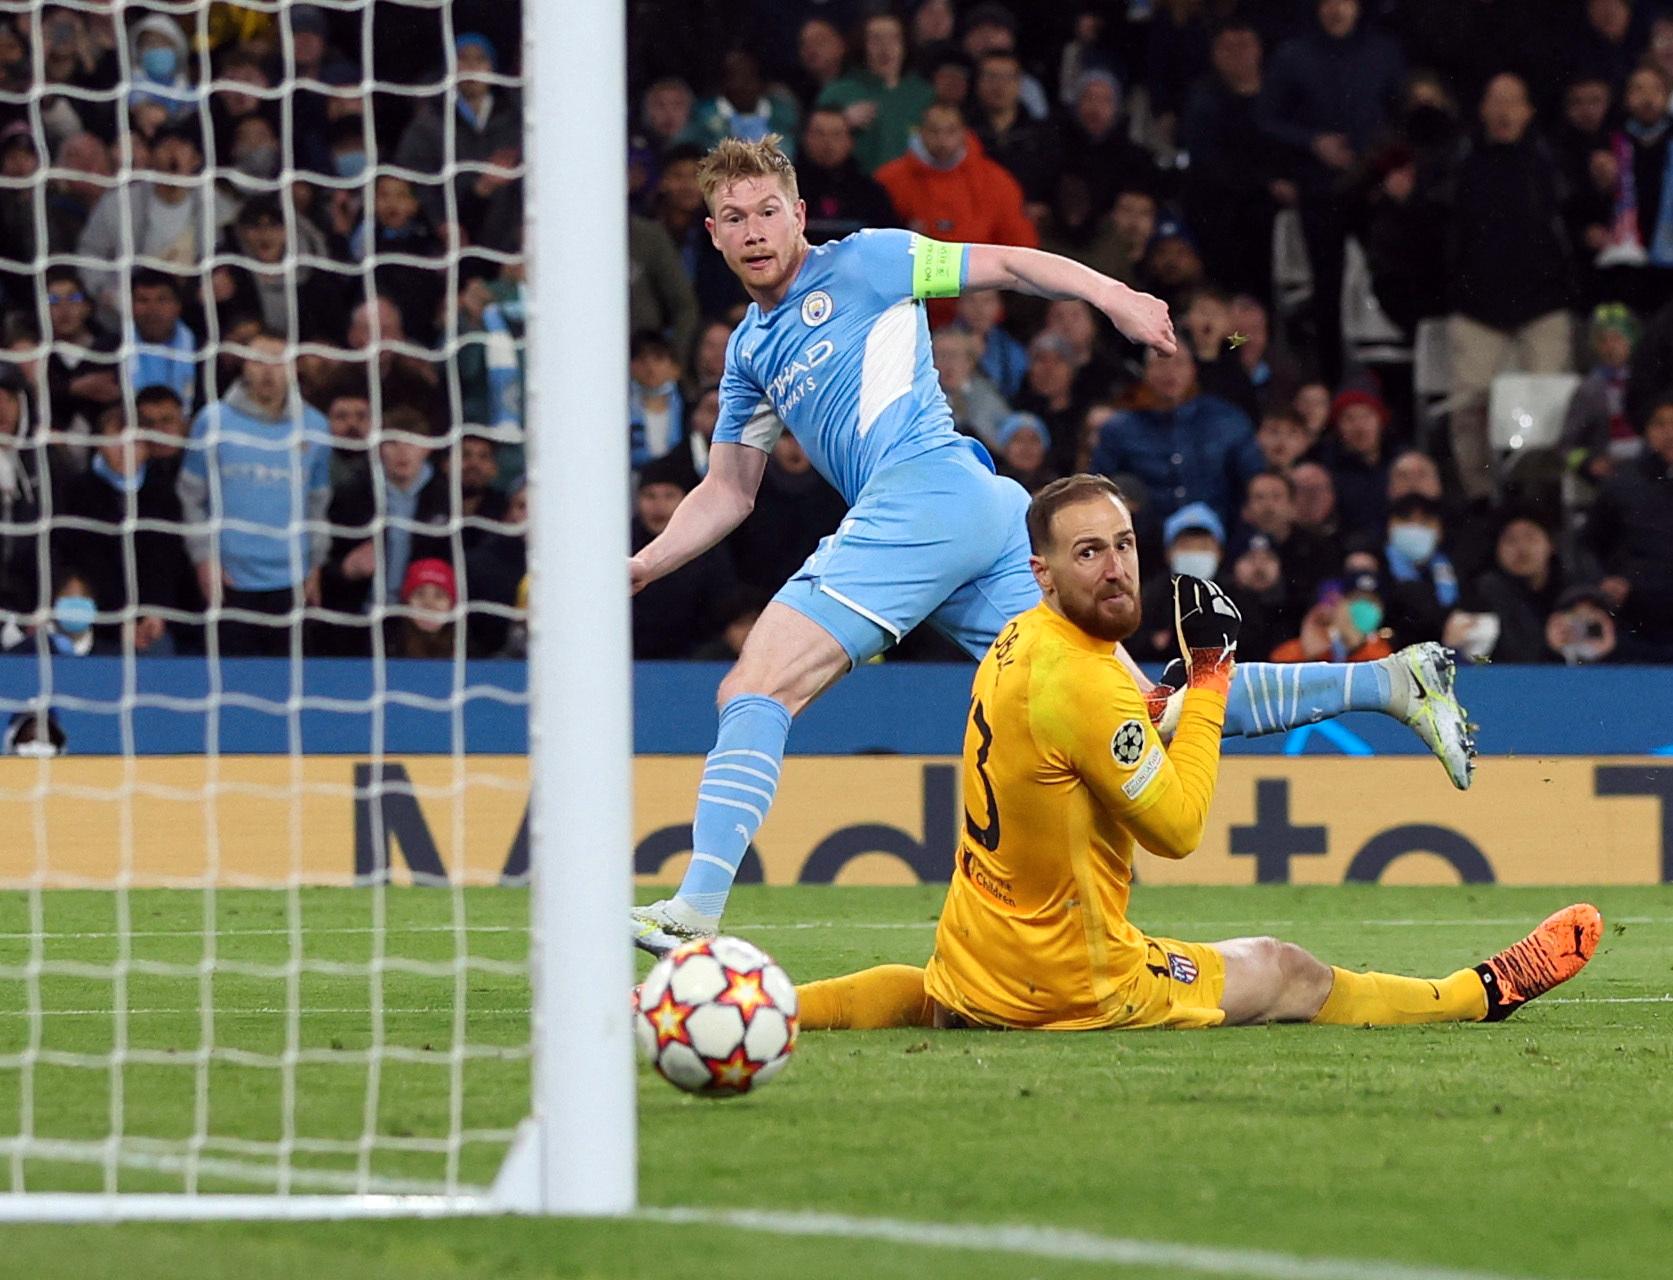 Magical timing gave Manchester City its first chance